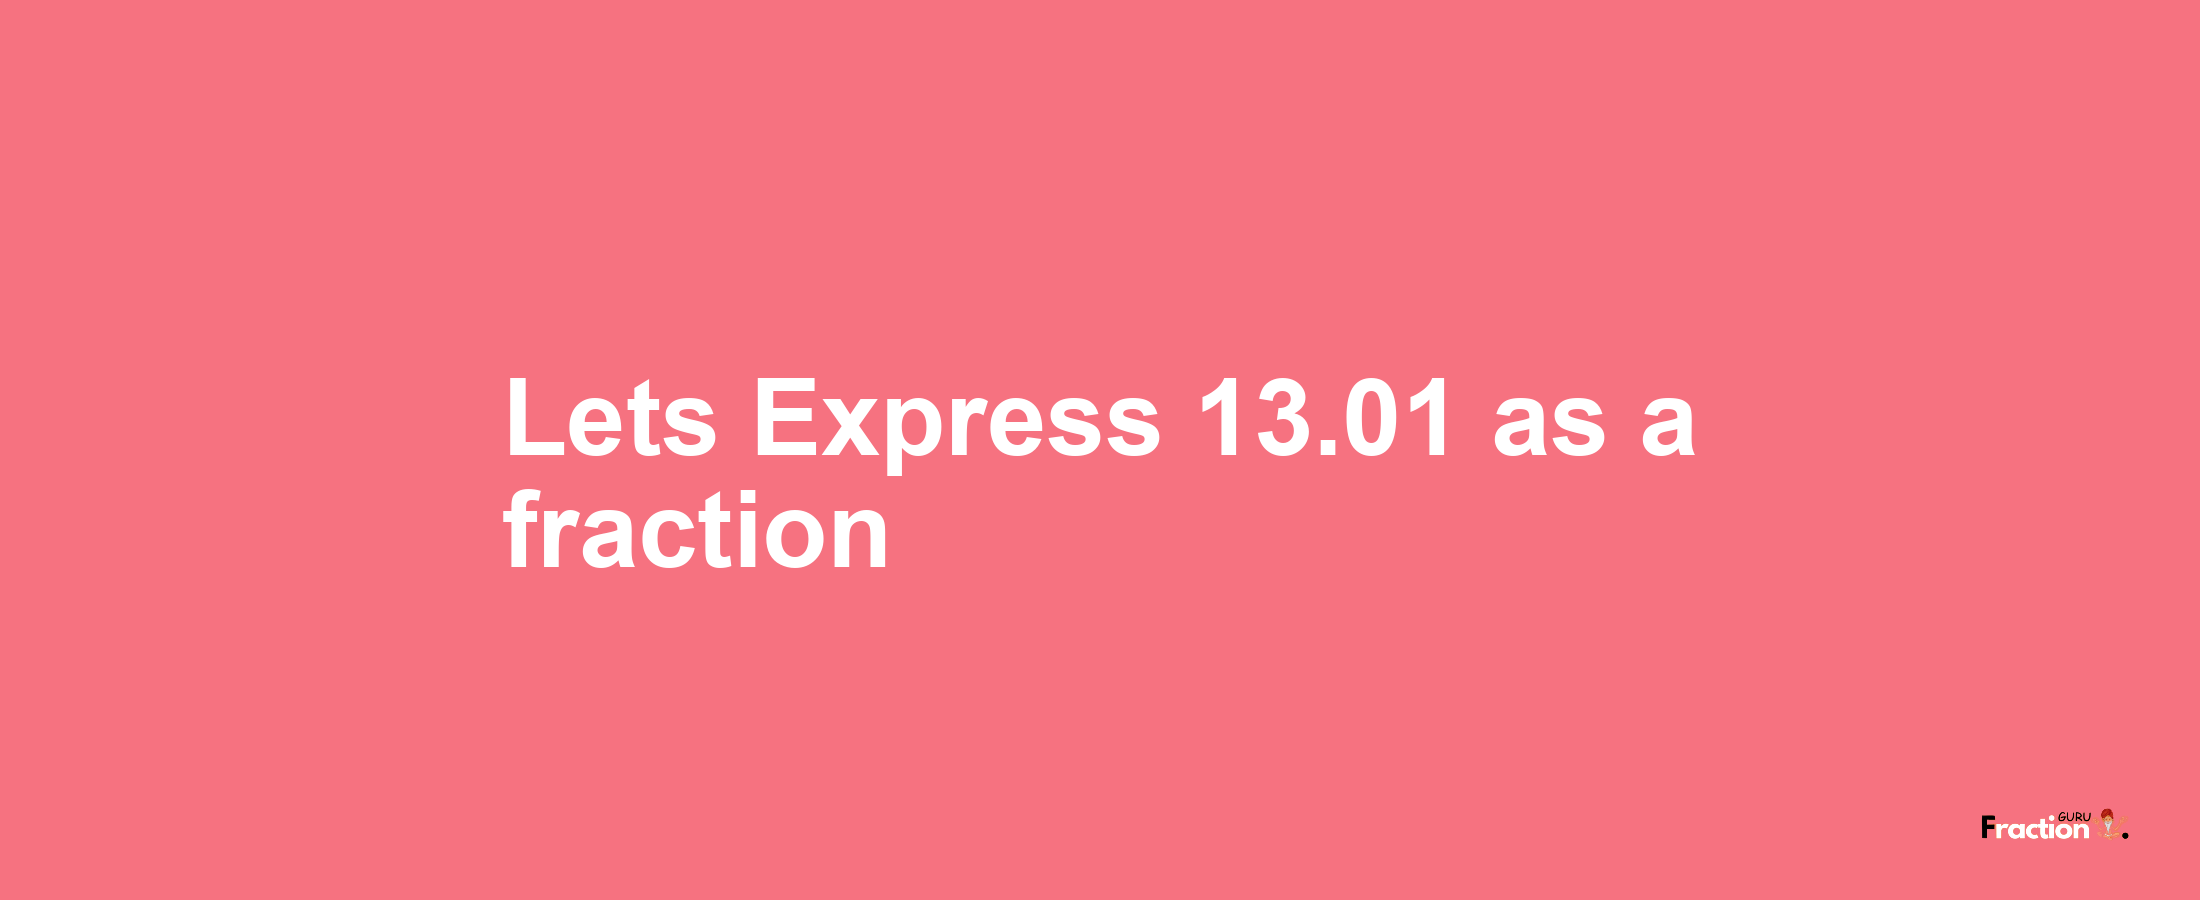 Lets Express 13.01 as afraction